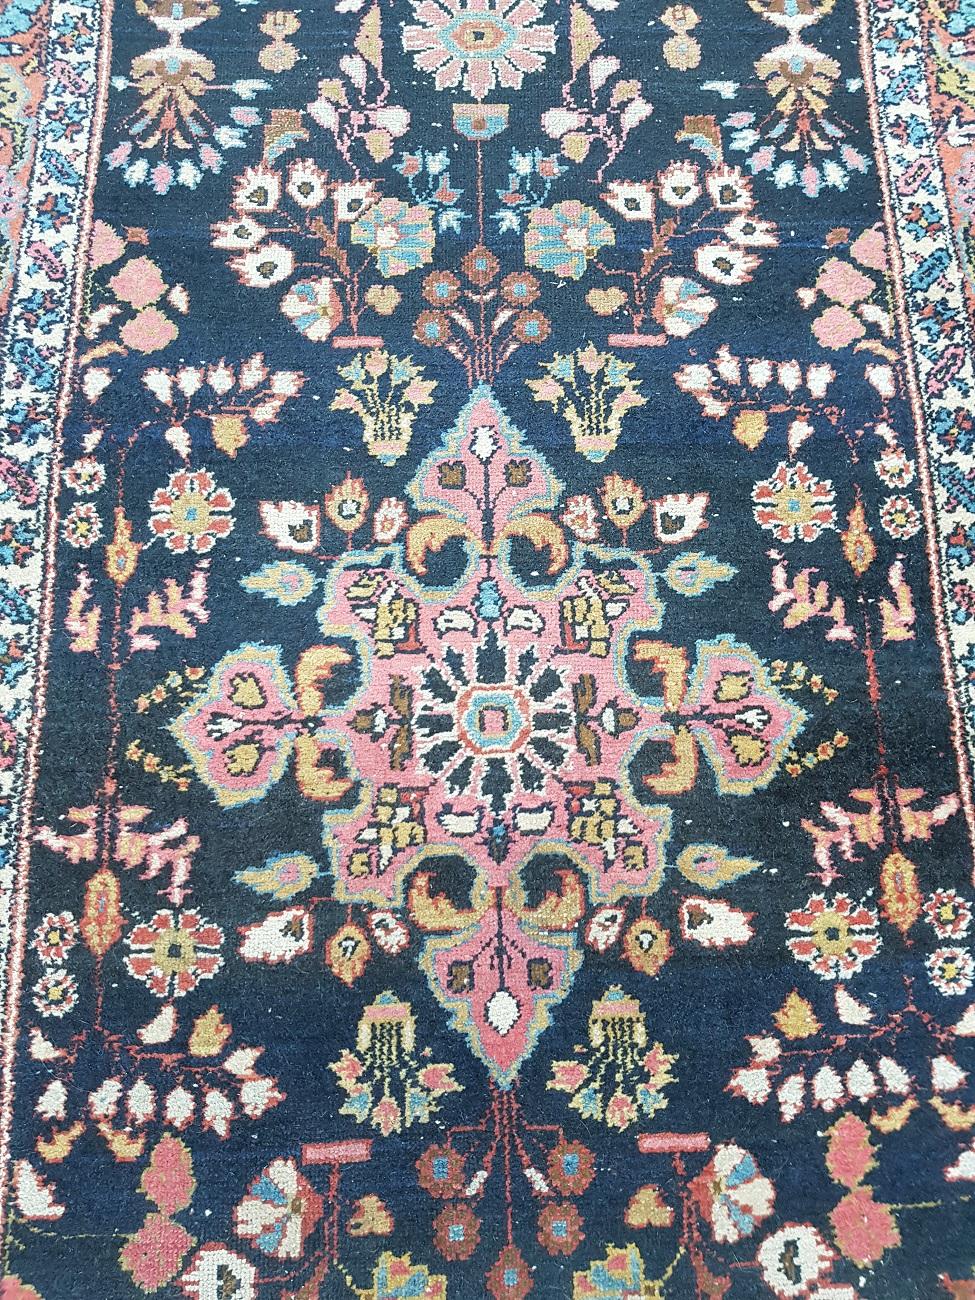 Old hand-knotted oriental wool on cotton warp Hamadan walker with a beautiful color pattern, from the mid-20th century (it has some traces of wear).

The measurements are,
Width 105 cm/ 41.3 inch.
Length 310 cm/ 122 inch.

